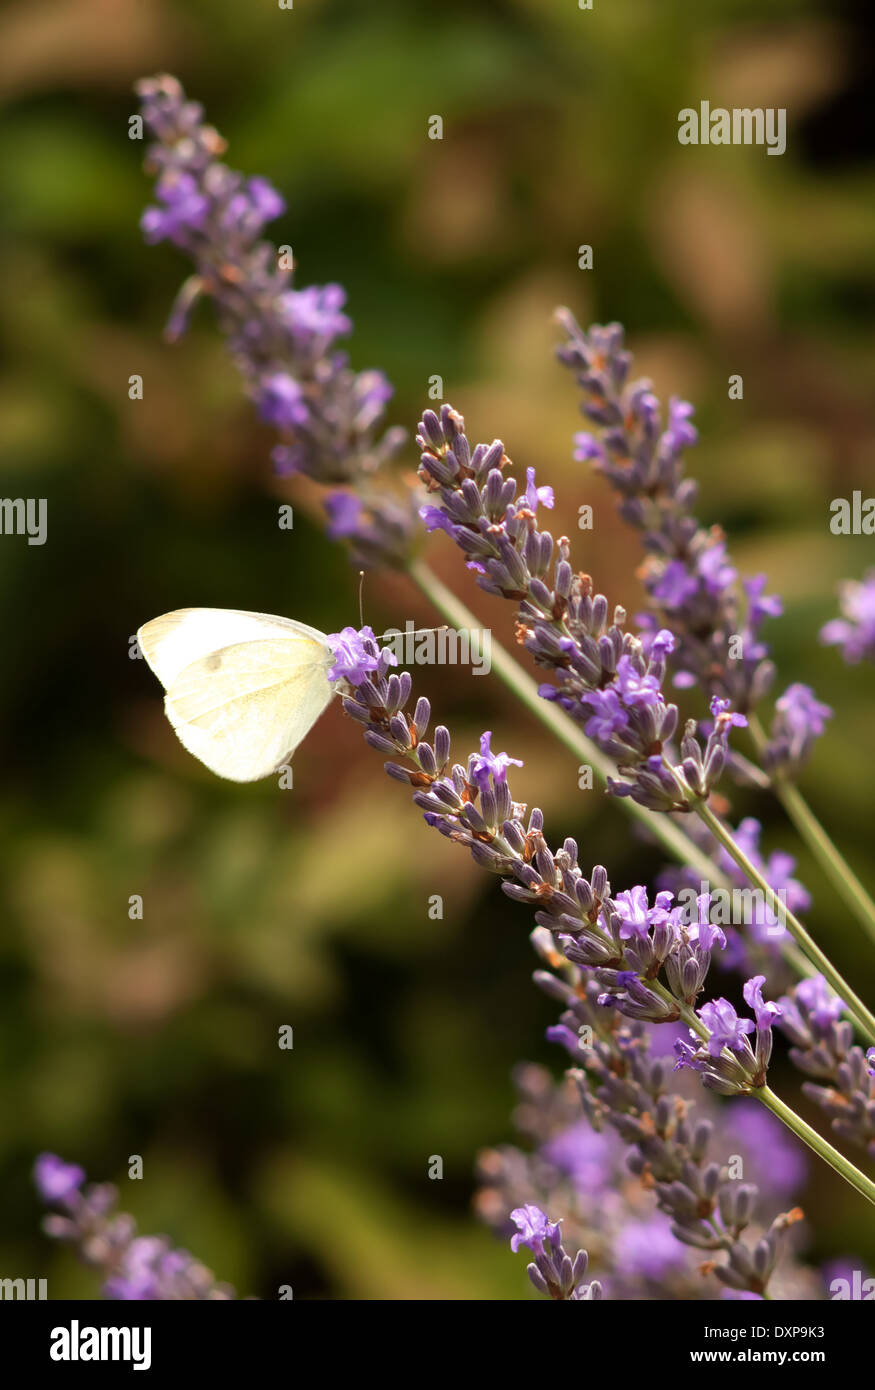 Cabbage white butterfly on lavender plant Stock Photo